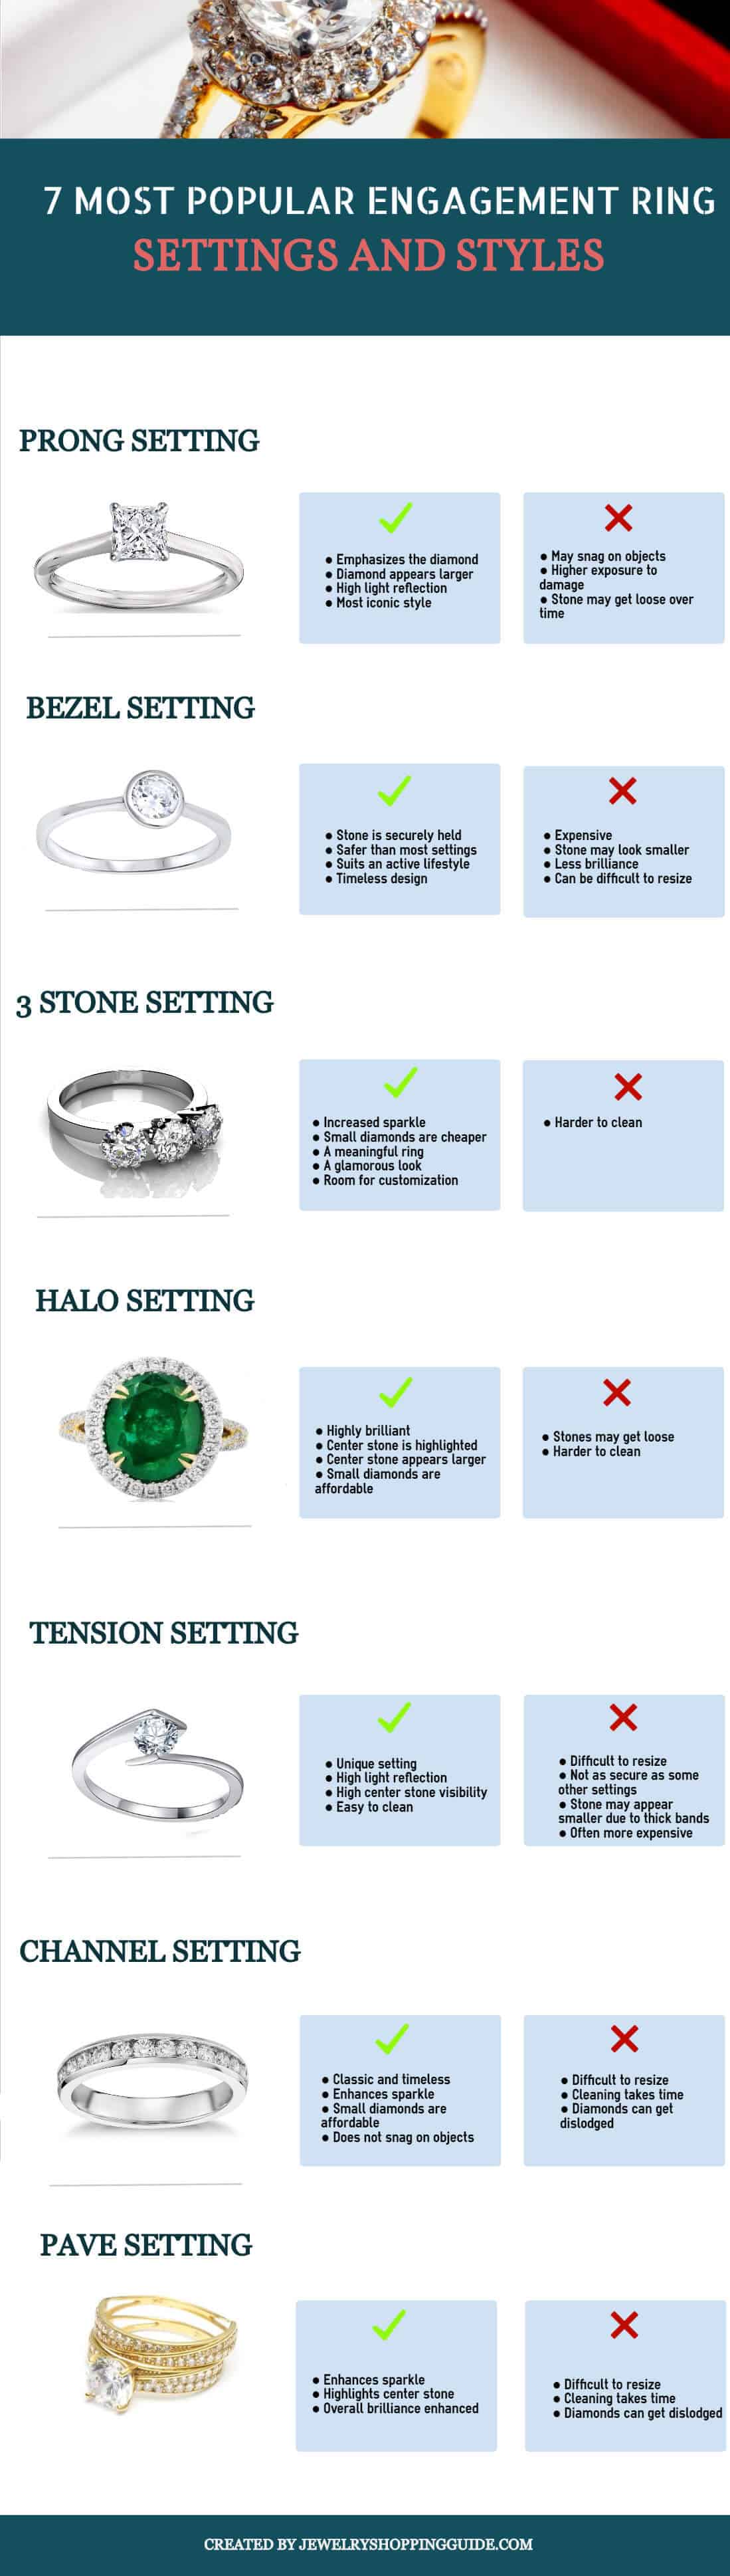 Infographic ENGAGEMENT RING SETTINGS AND STYLES